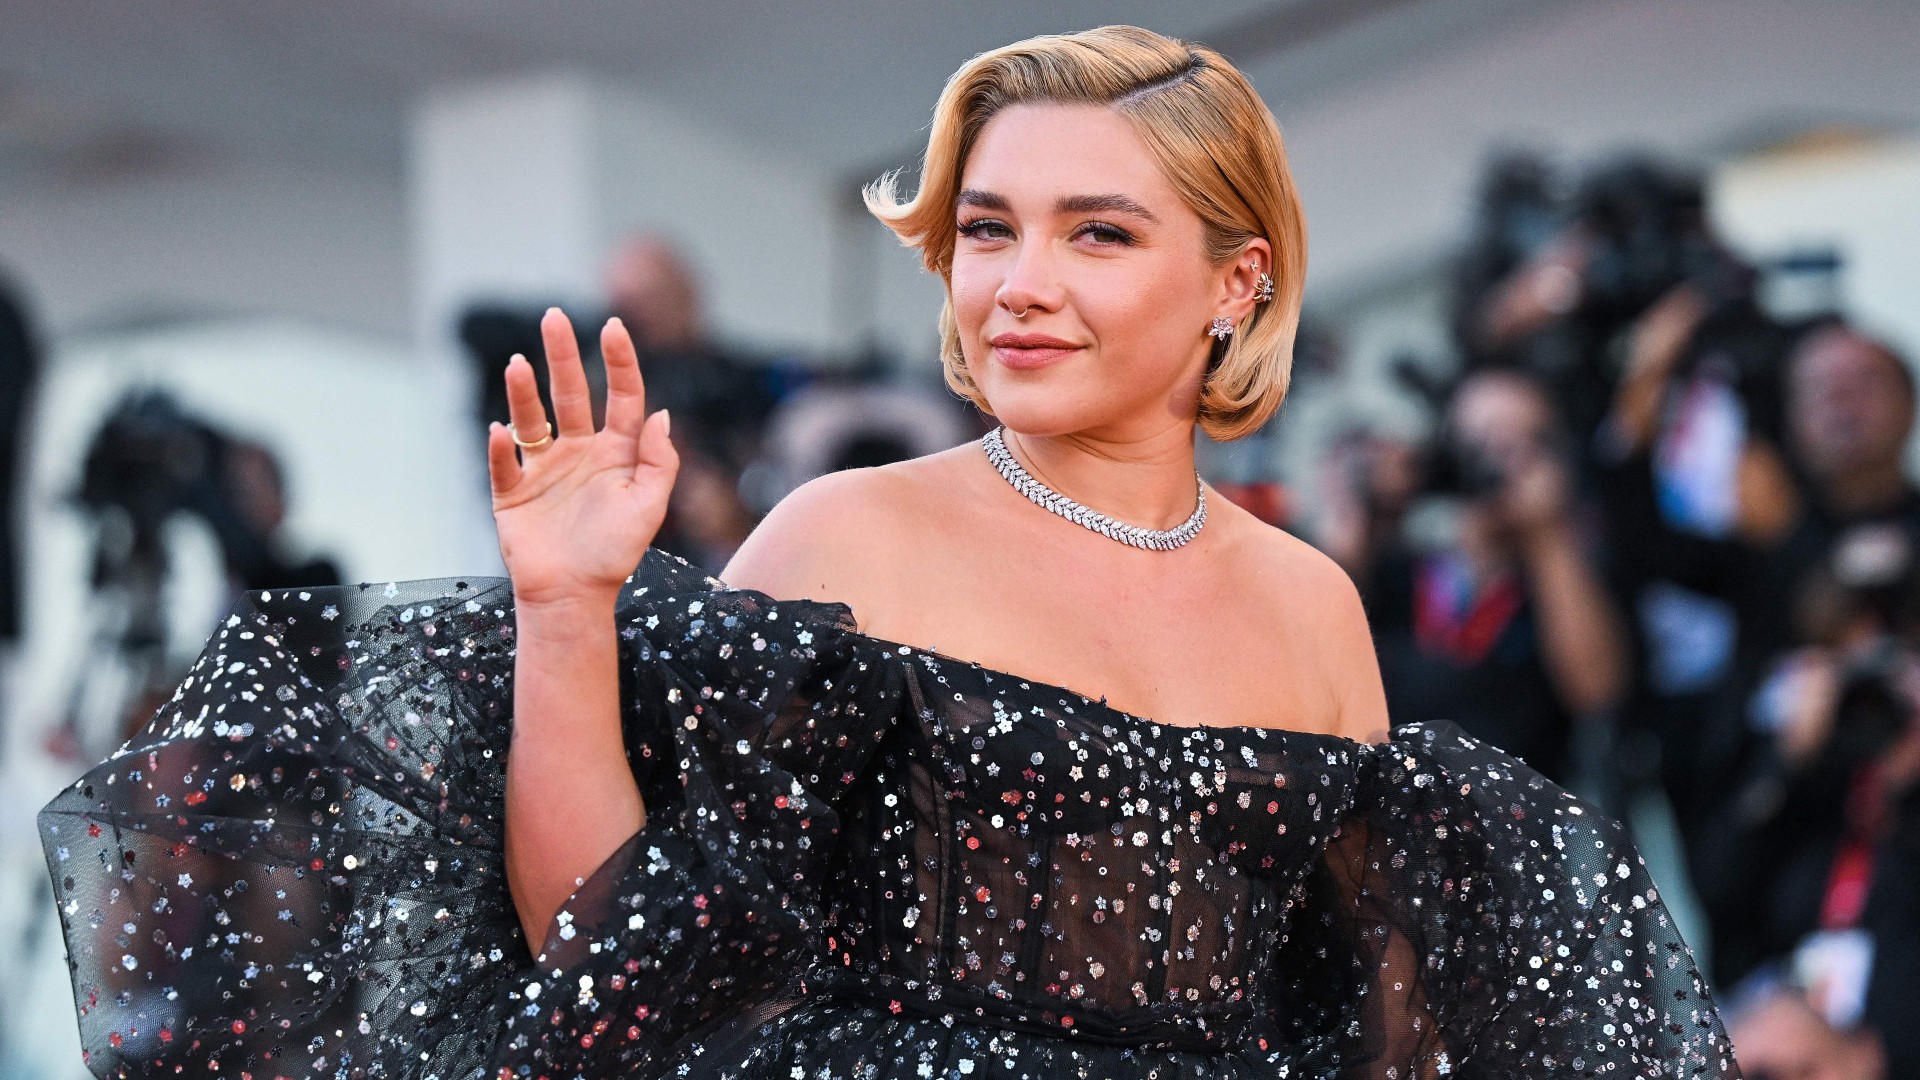 7 Roles That Made Florence Pugh a Fast-Rising Star